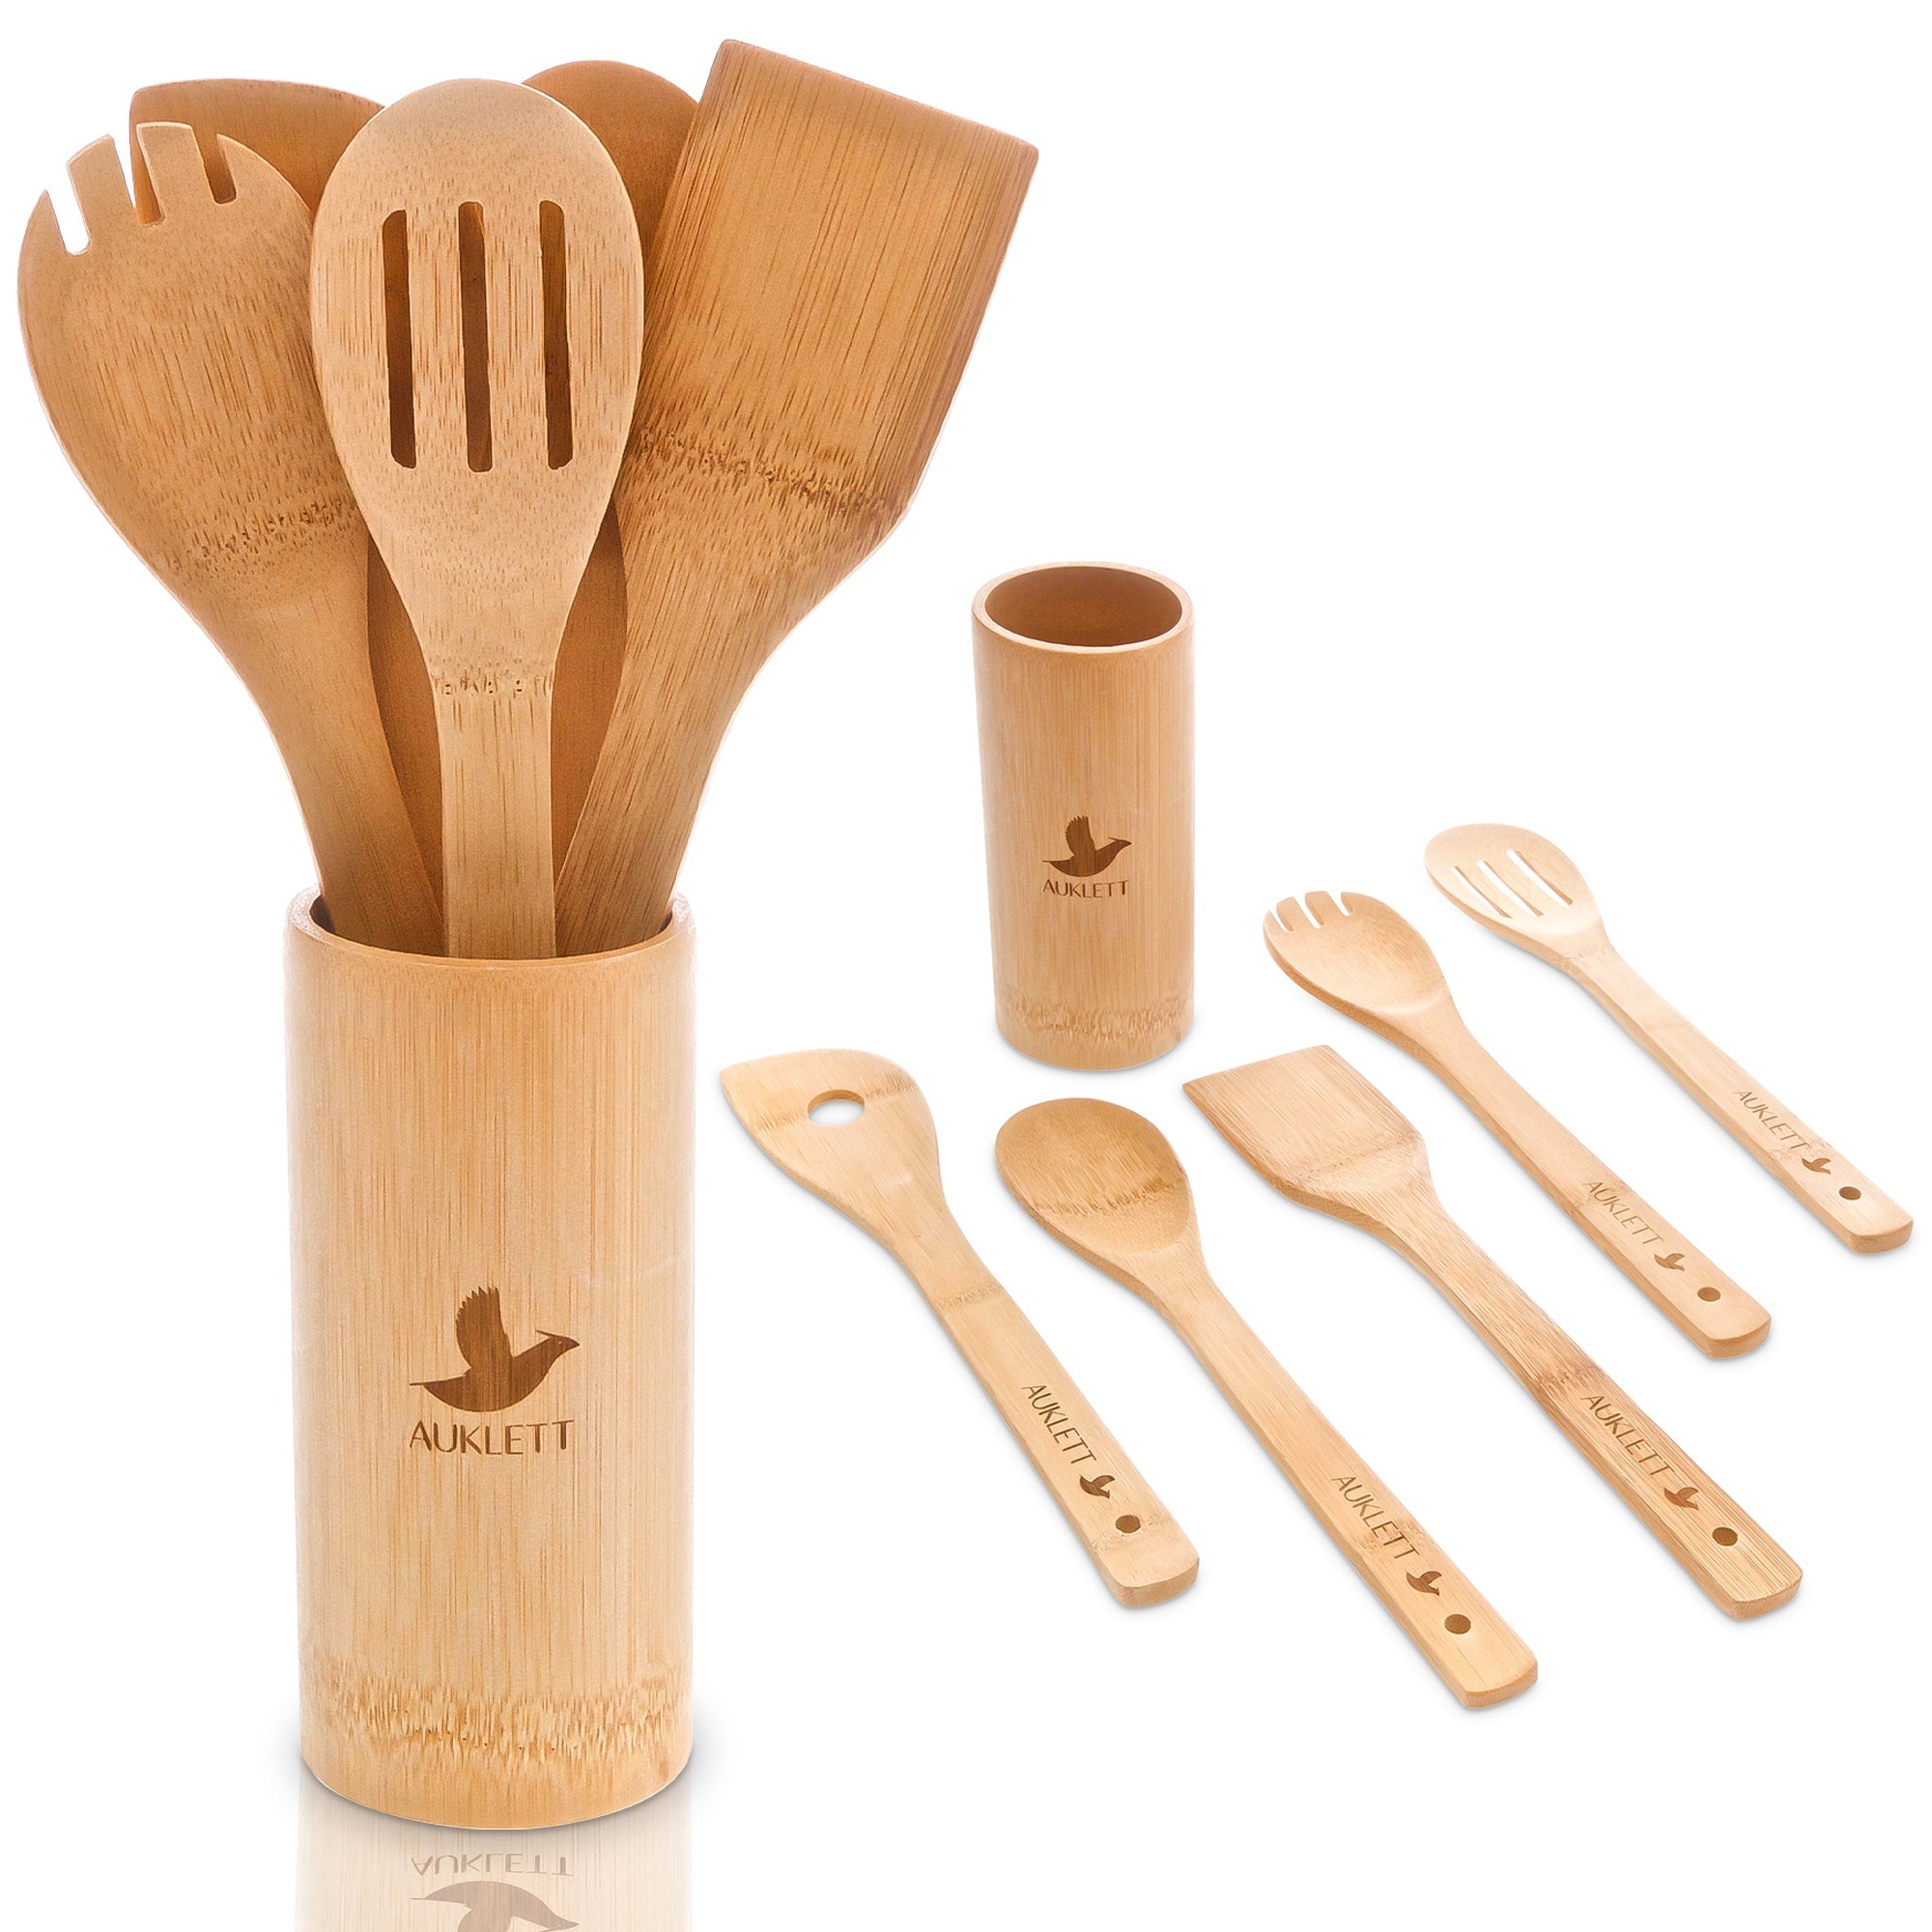 Product picture of 5 Set Bamboo Cooking Utensils Set with Holder